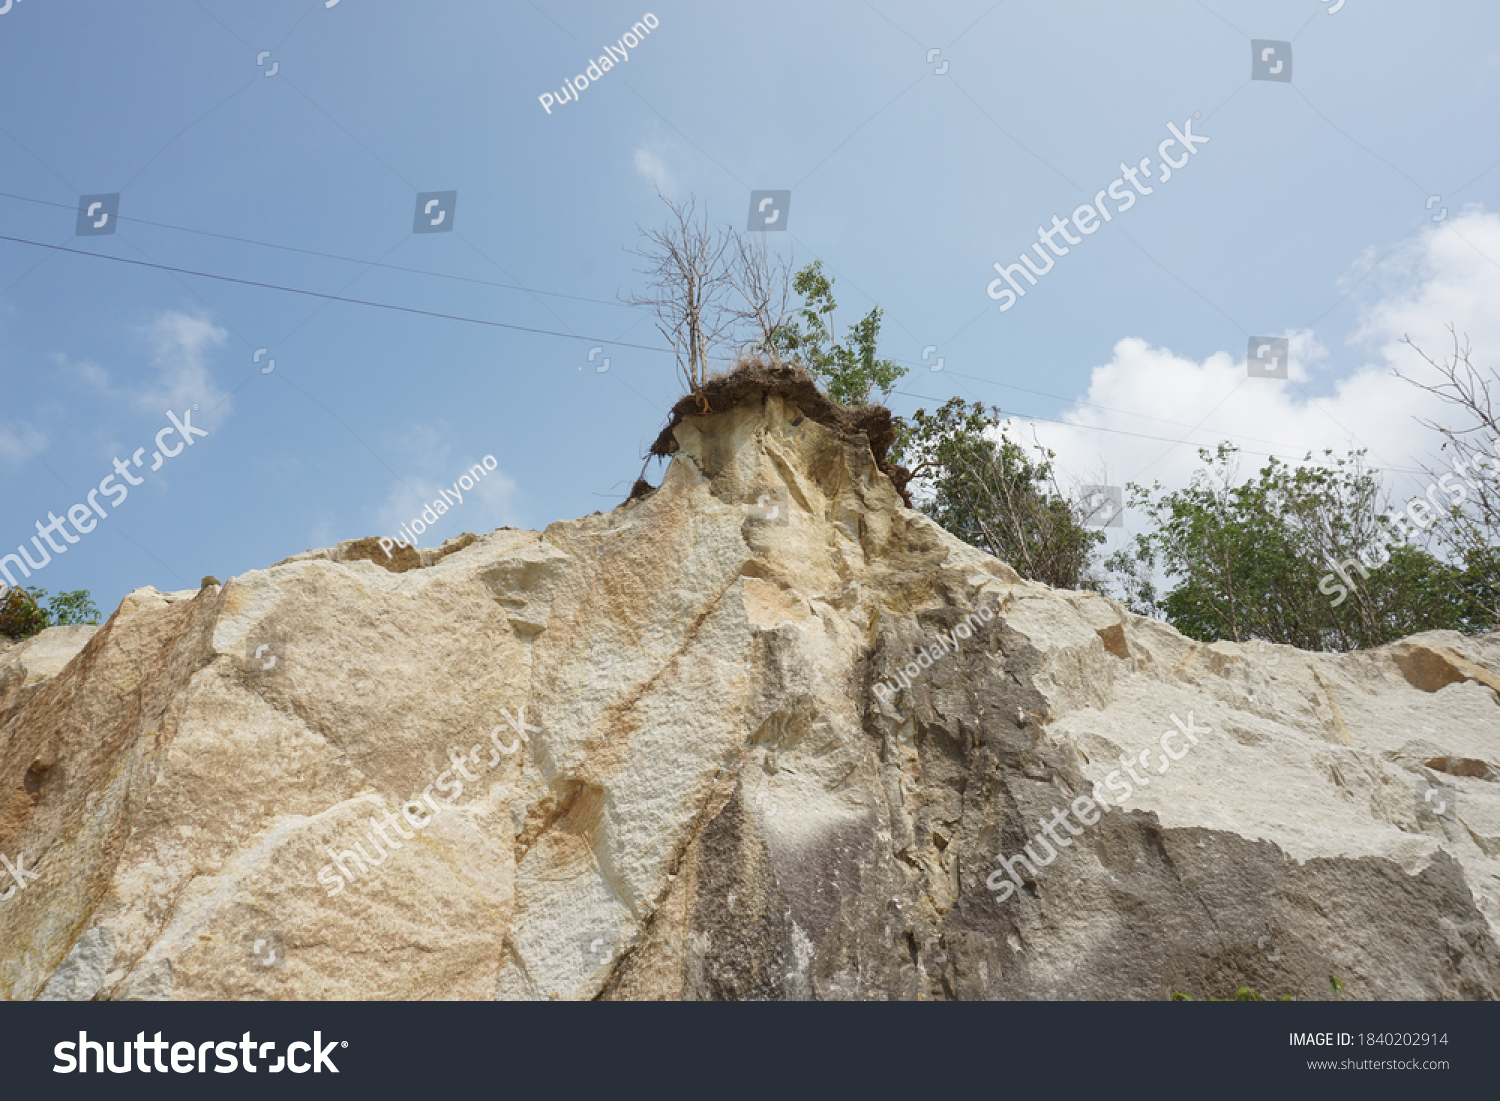 limestone hills, visible limestone mining. benefits of limestone as a mixture of building materials. limestone can also be used as a mixture of substances for fertilizer and pest control. #1840202914